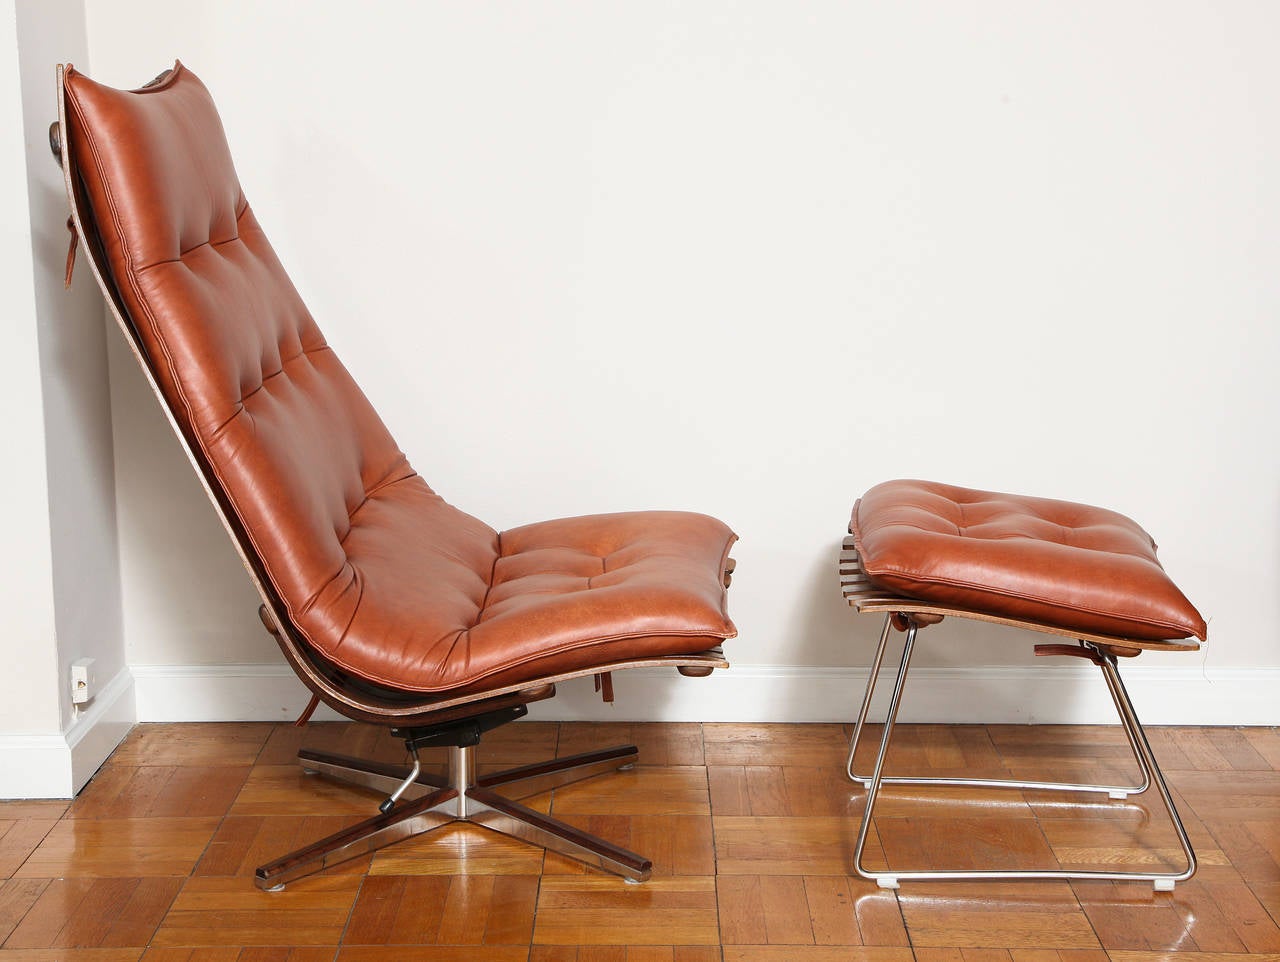 Leather Hans Brattrud Rosewood 'Scandia' Swivel Lounge Chair and Ottoman, Hove Mobler